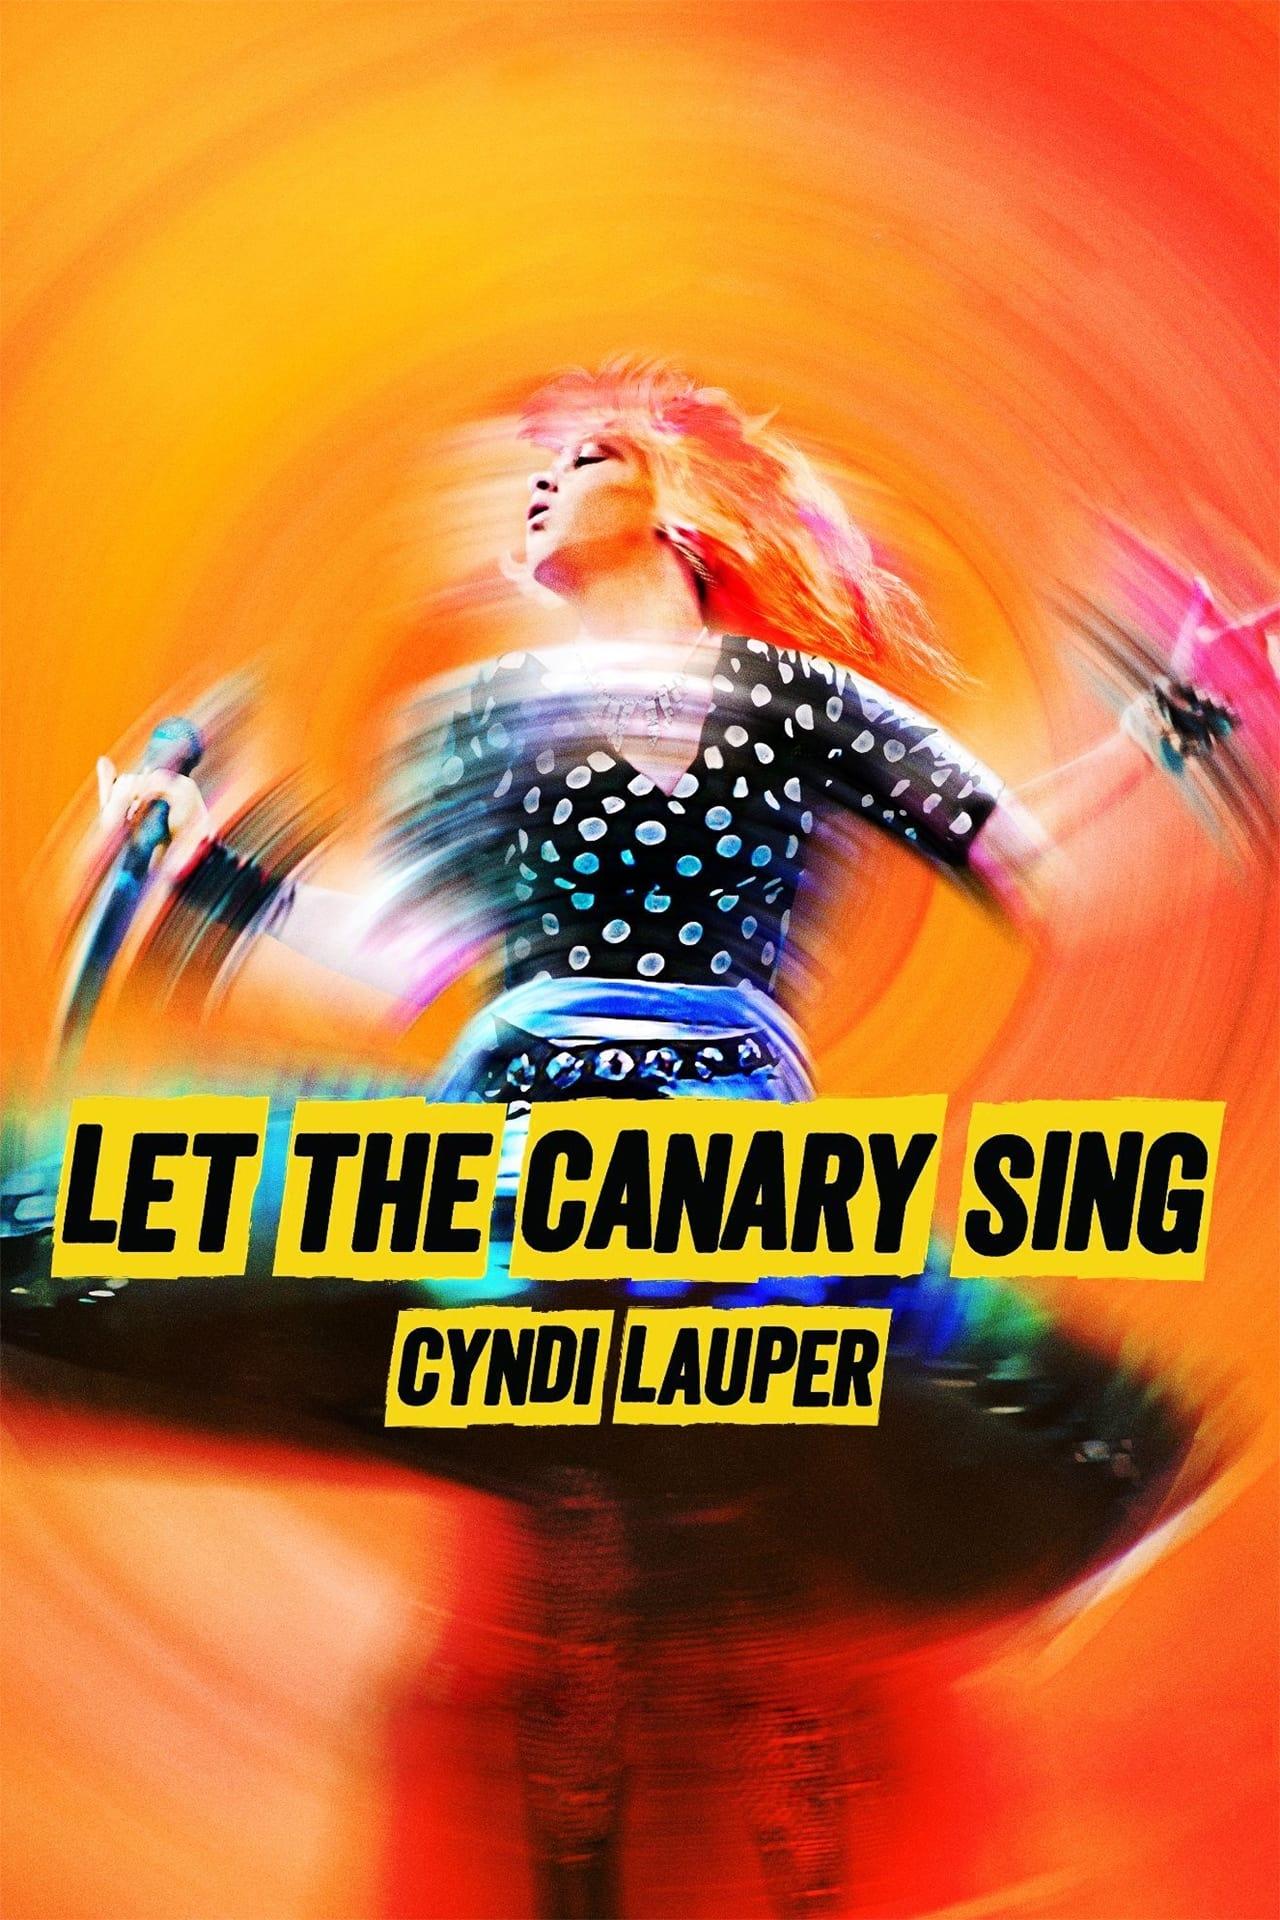 Let the Canary Sing poster